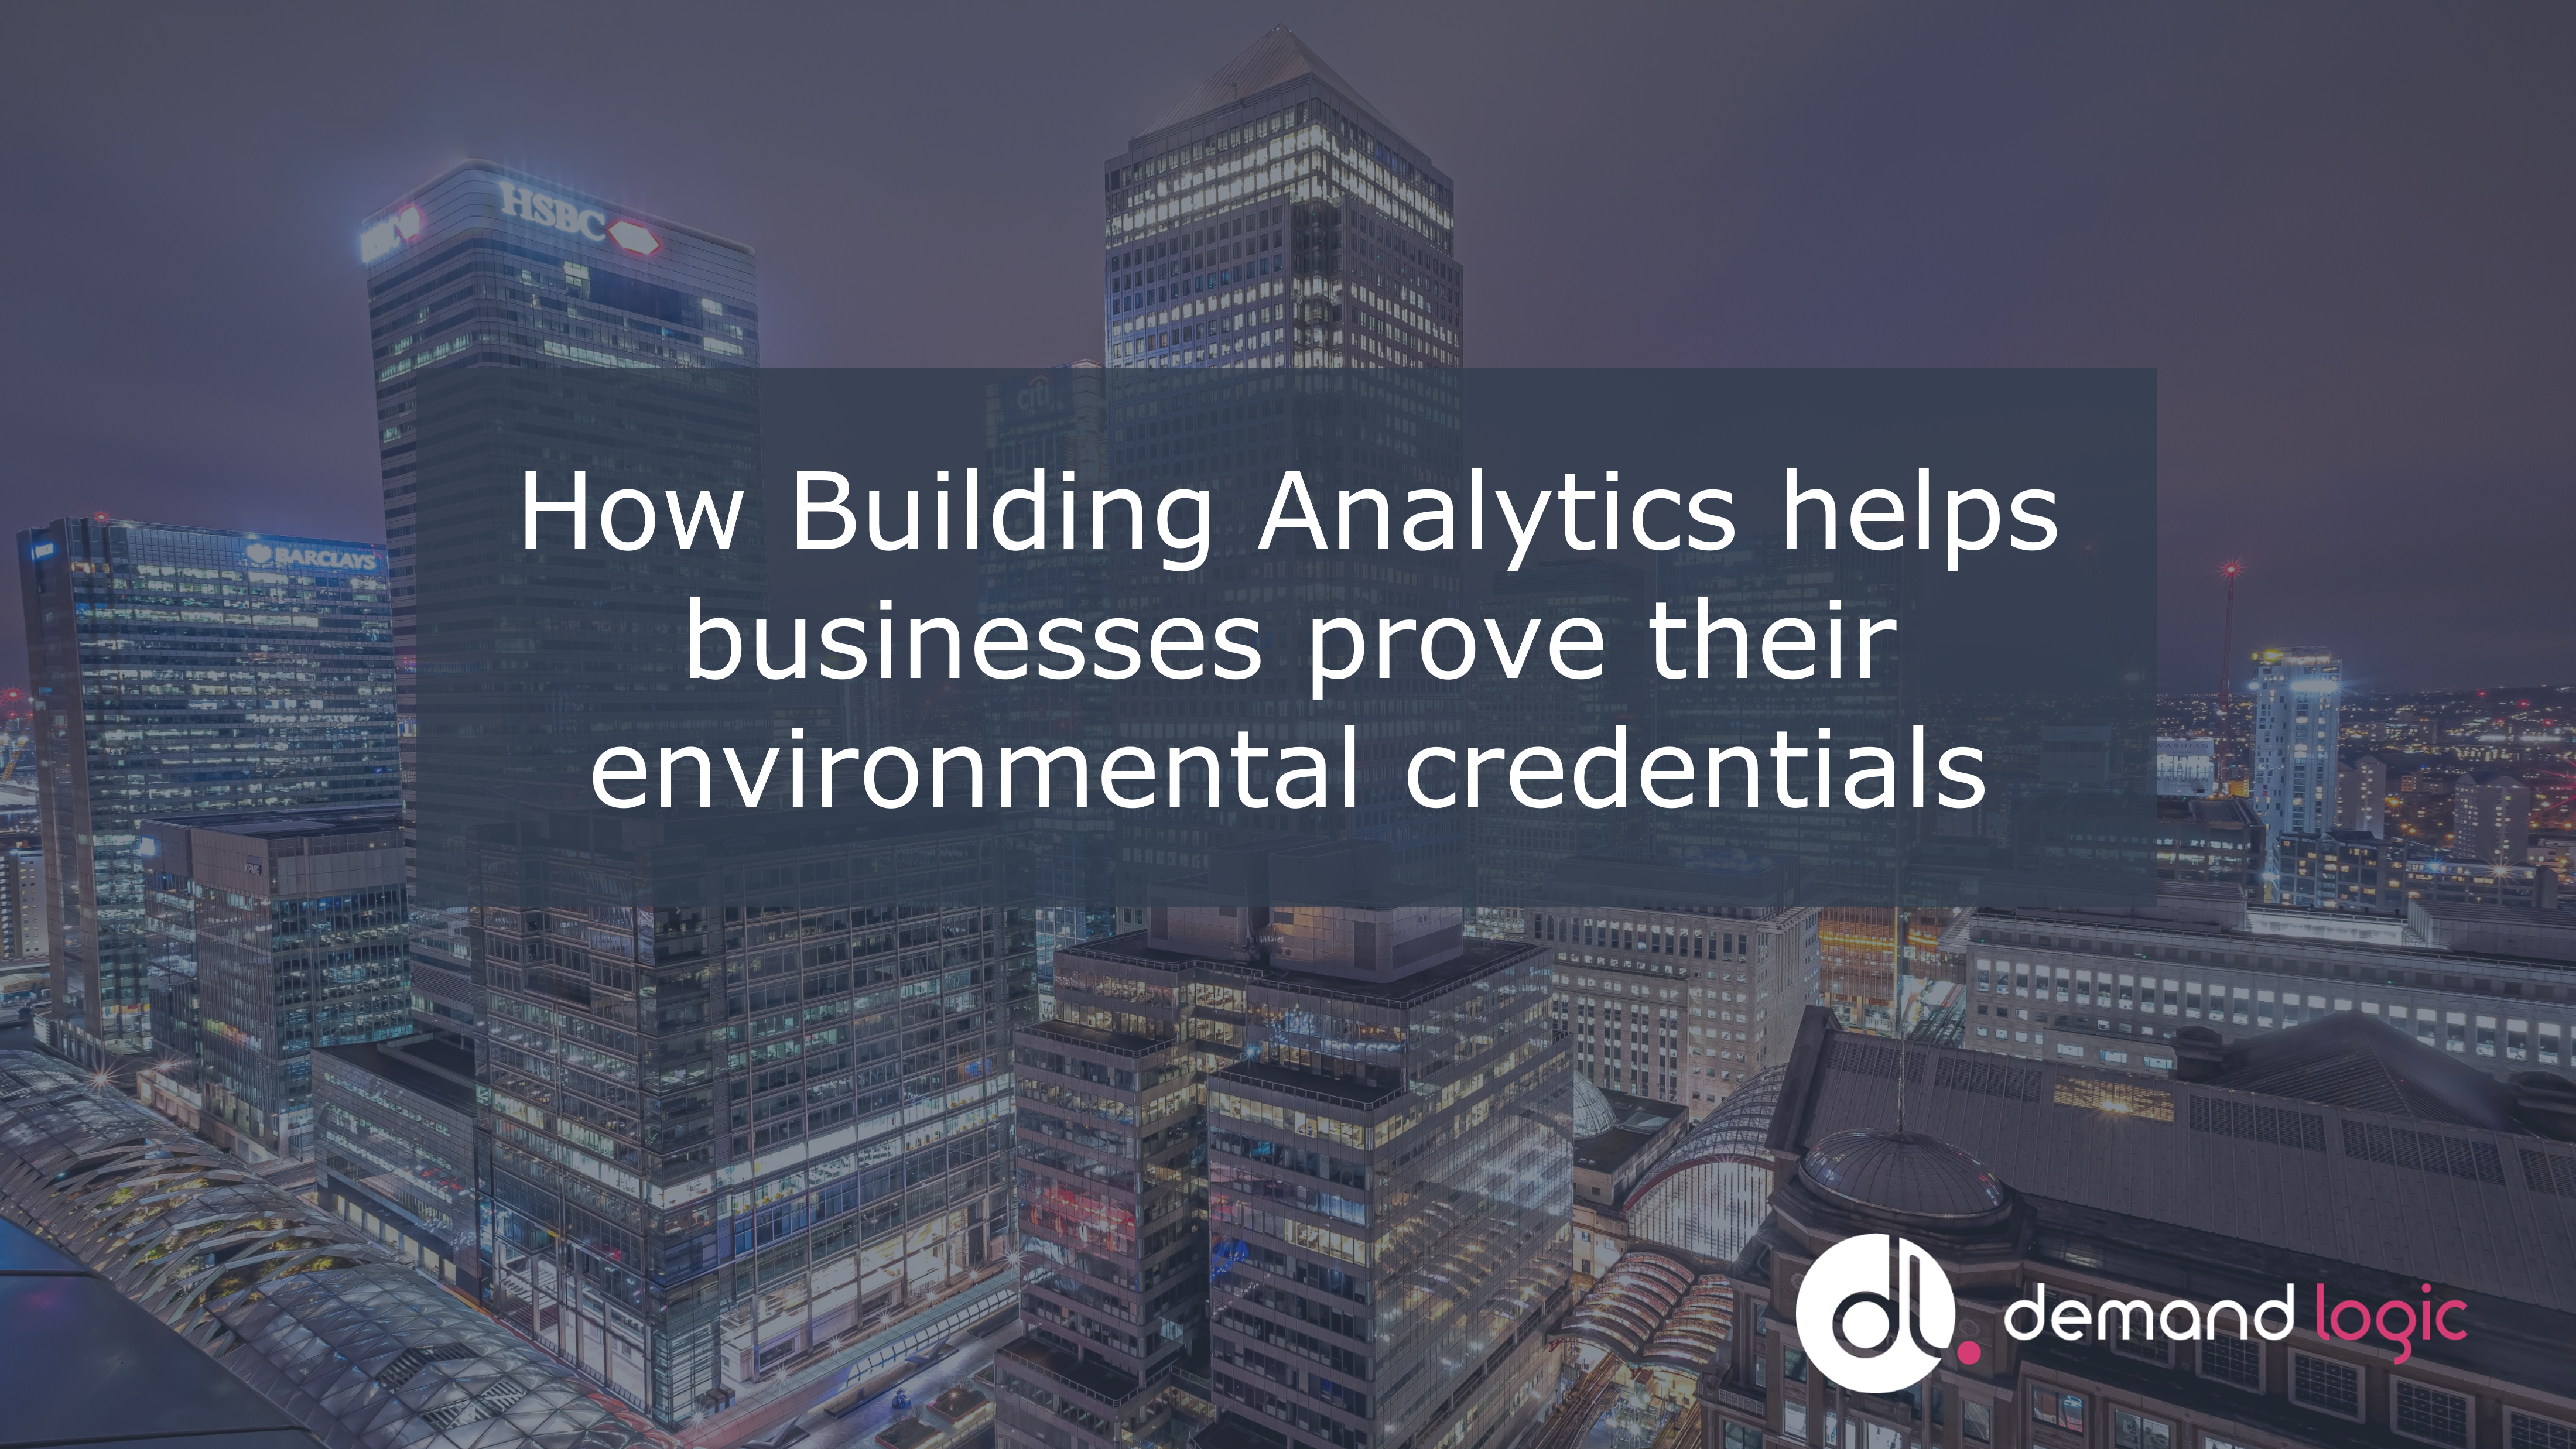 How Building Analytics helps businesses prove their environmental credentials